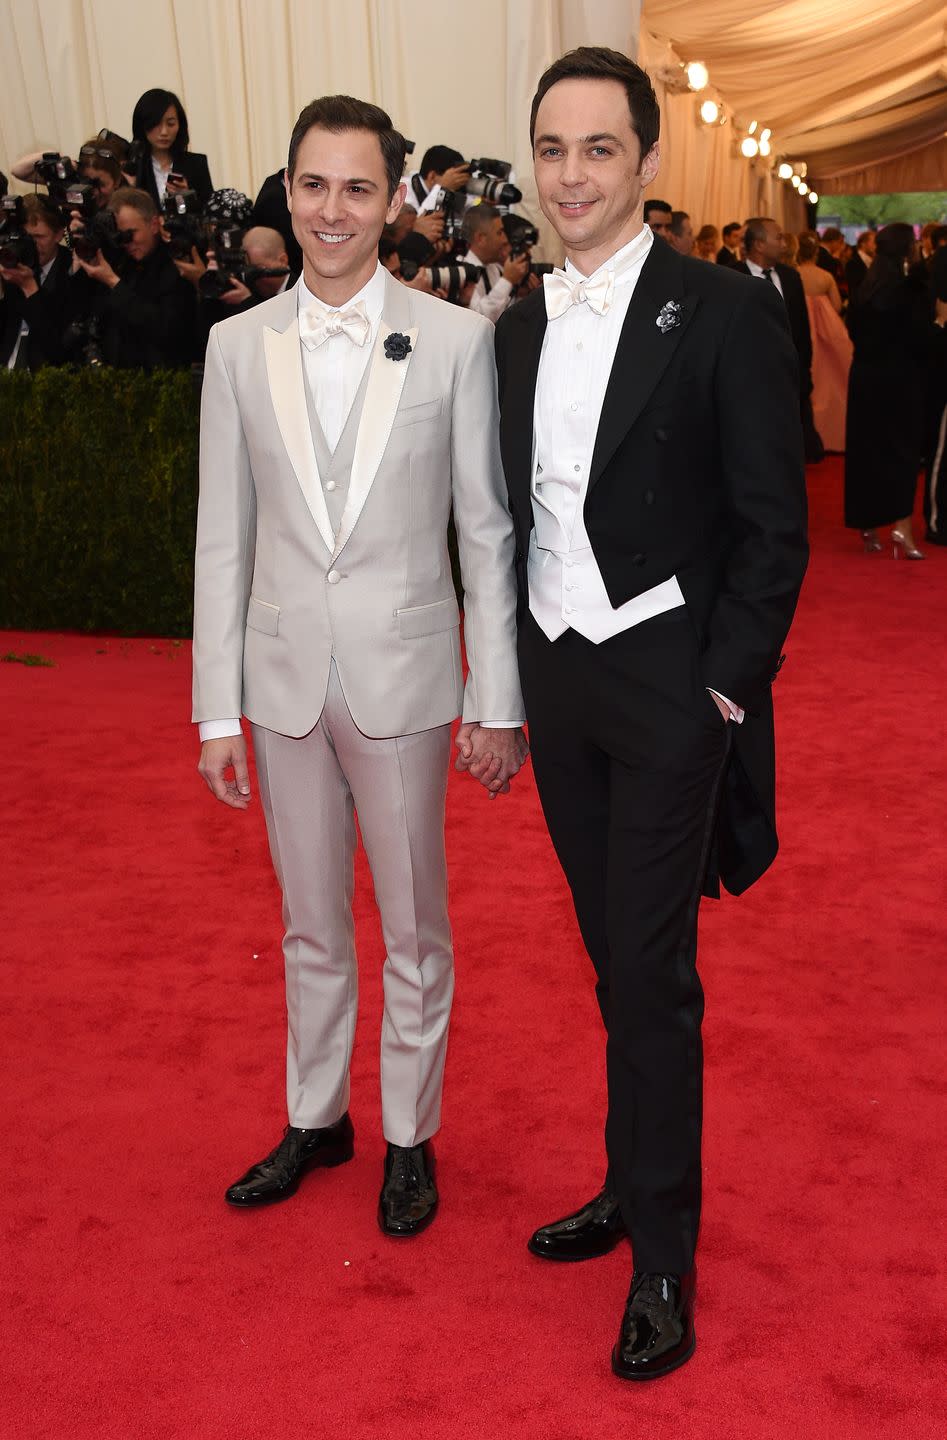 Jim Parsons, 46, and Todd Spiewak, 42